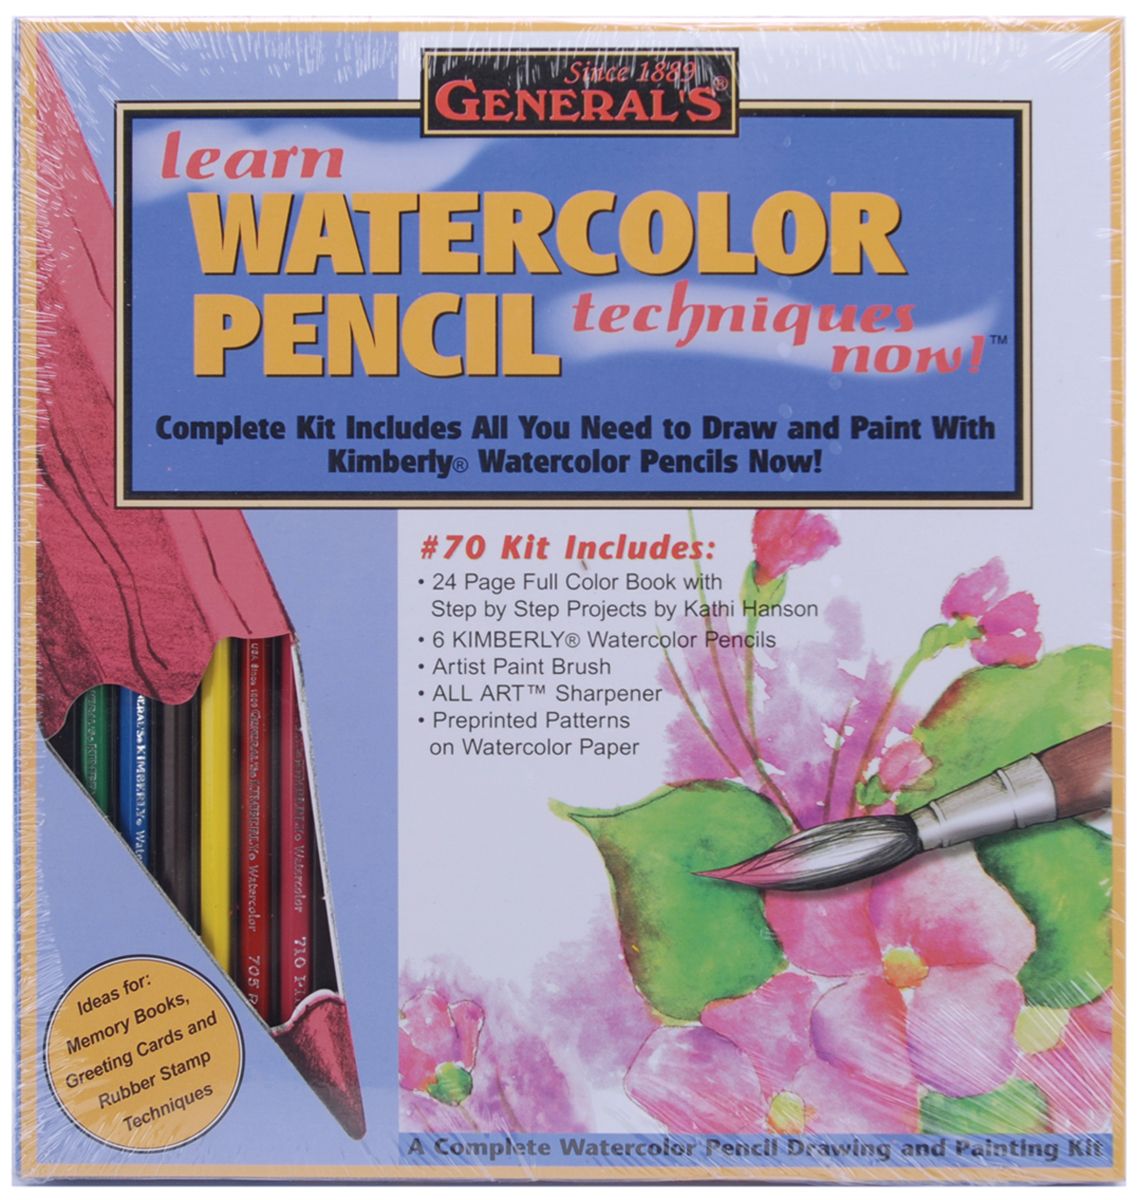 General's Learn Watercolor Pencil Techniques Now! Kit